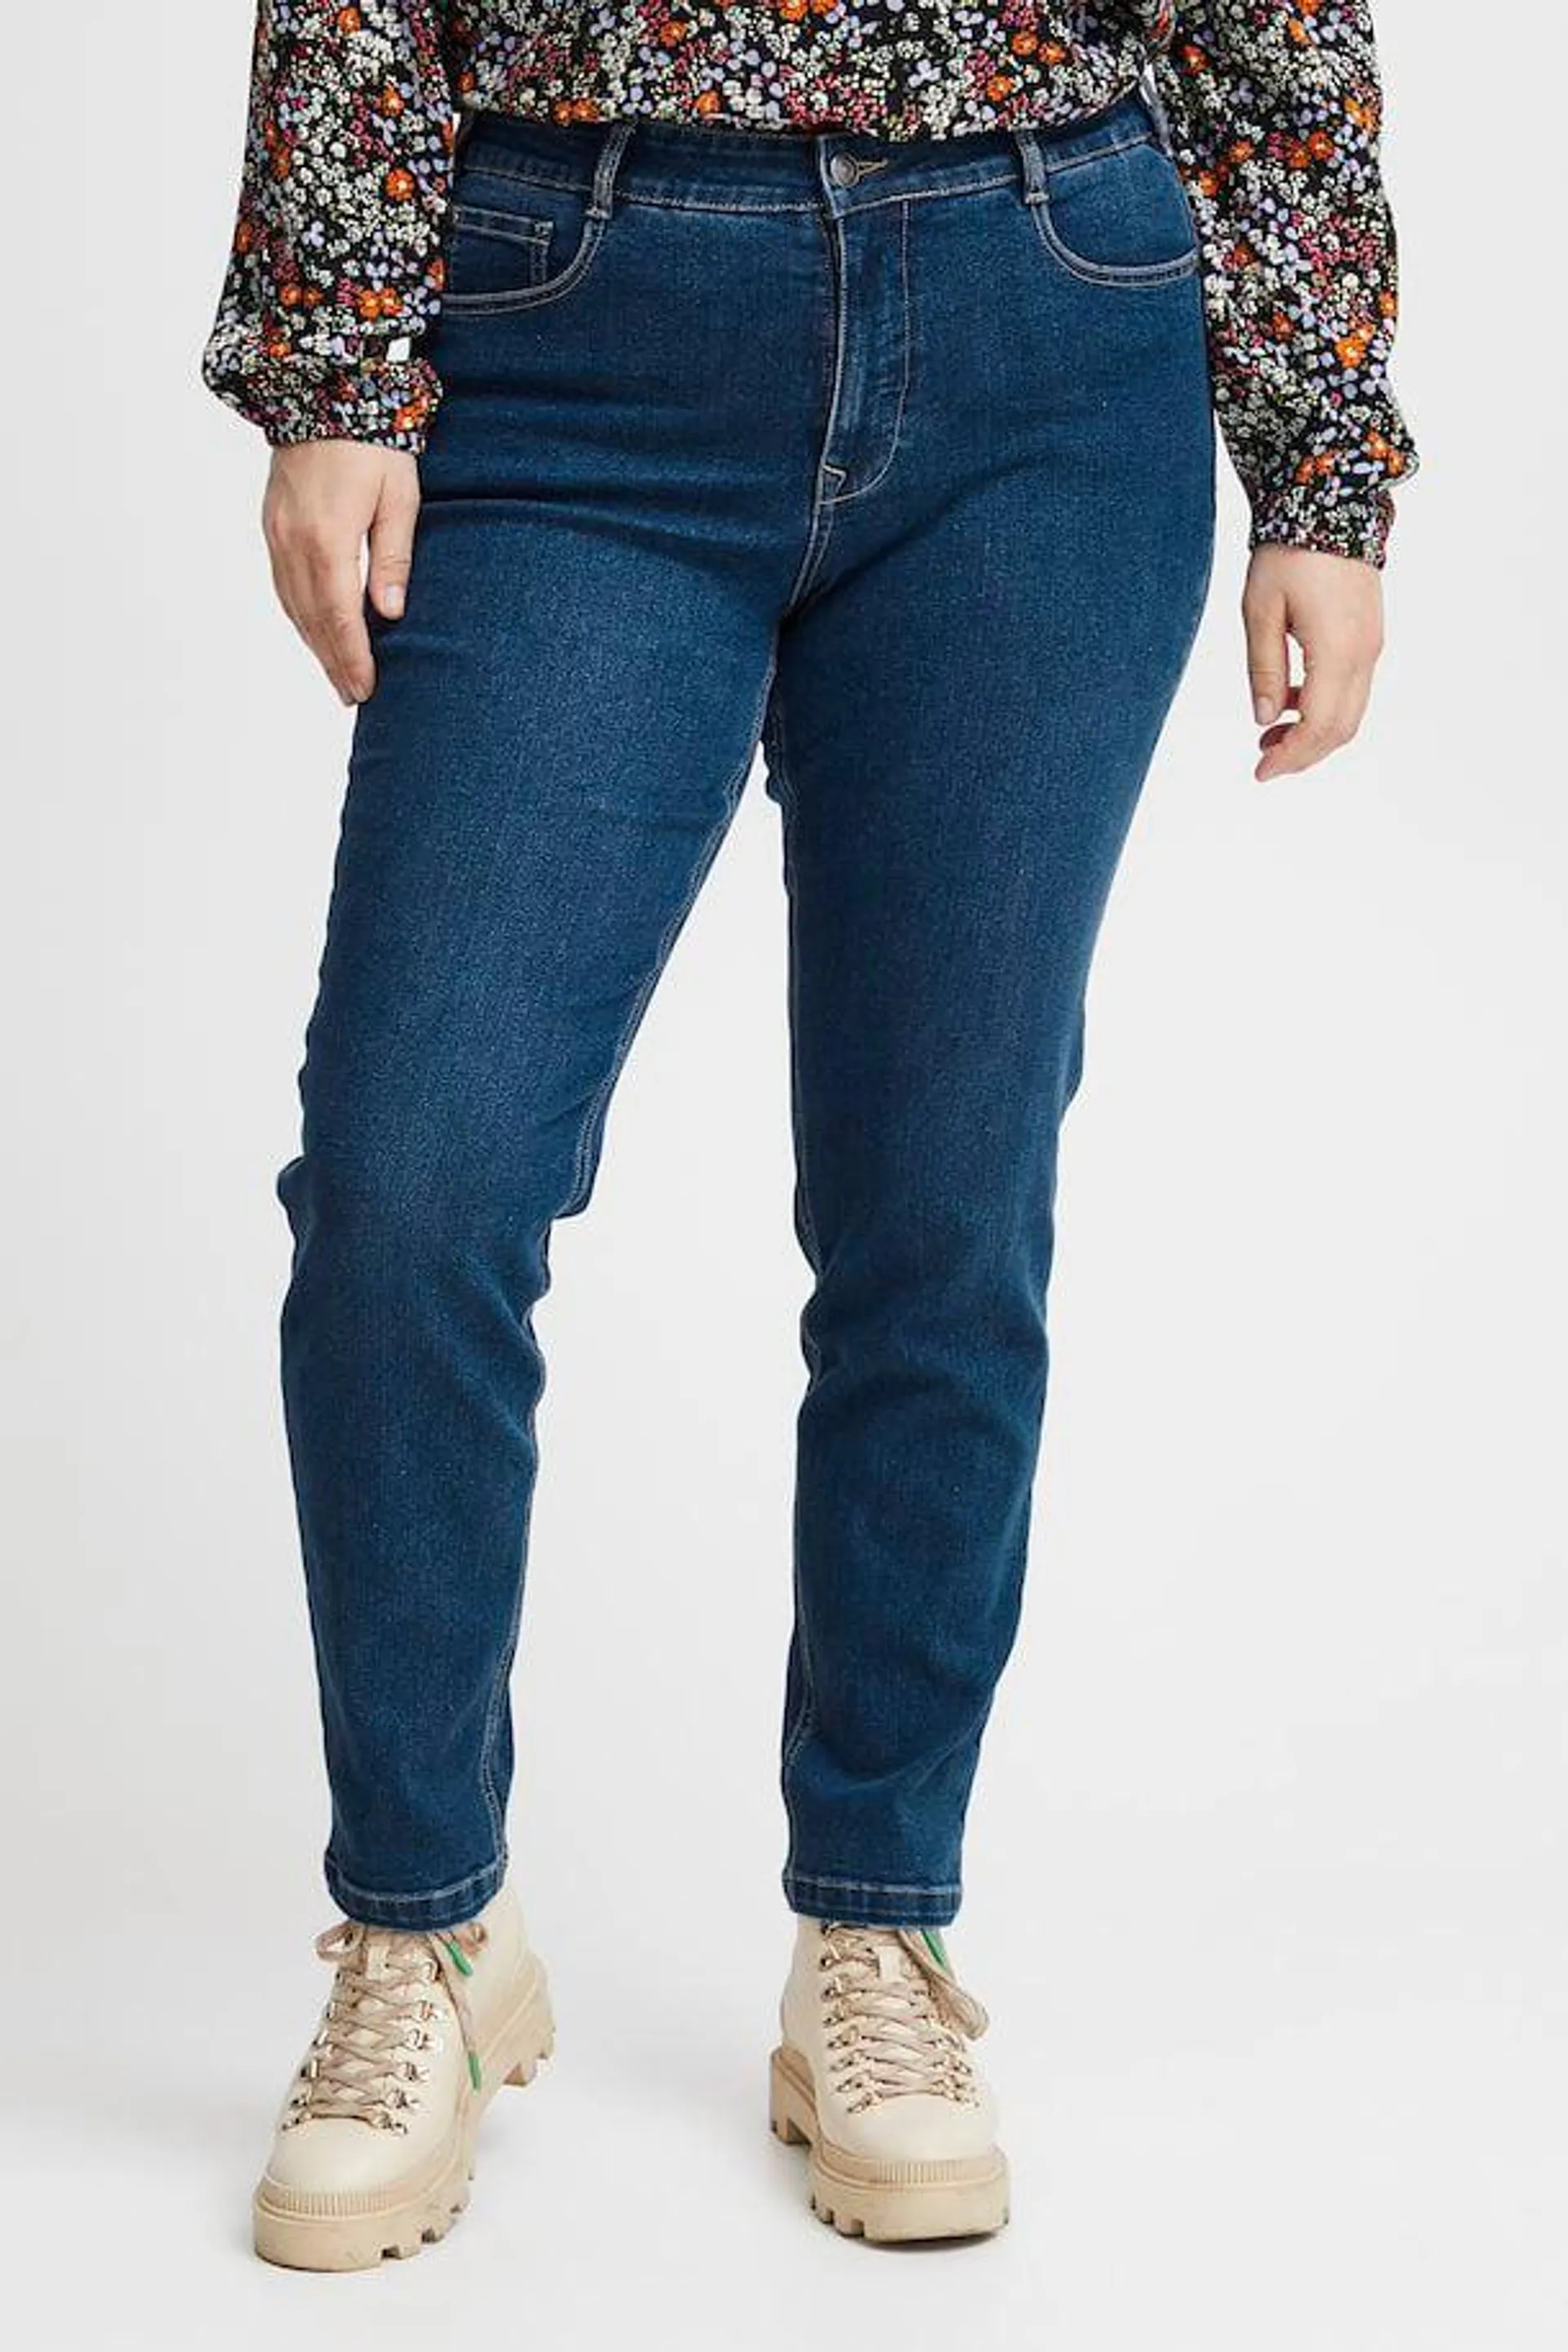 FPELLIE Jeans